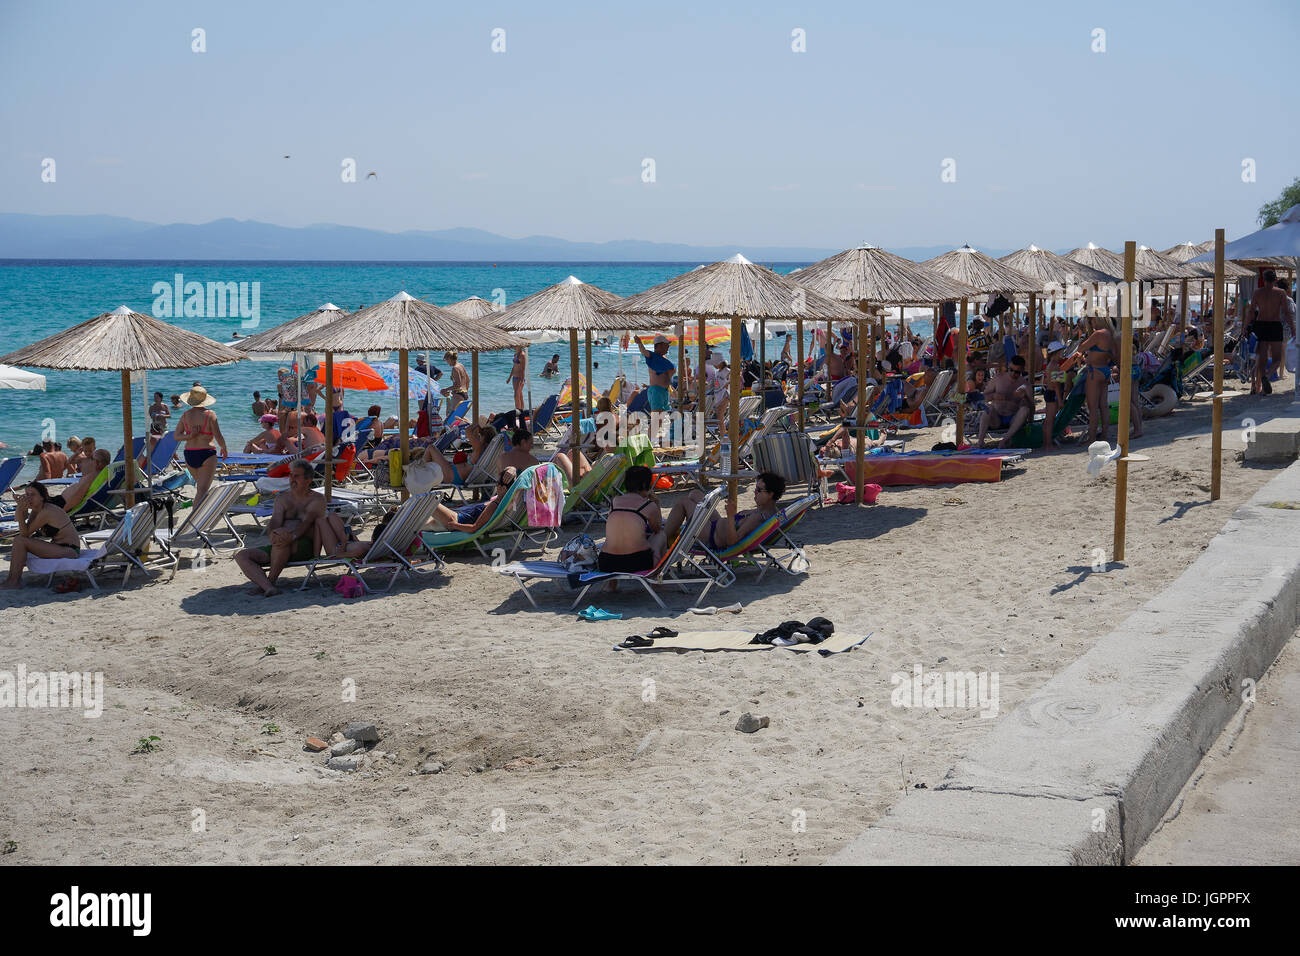 Bathers on the beach on a hot summer day at Greece. Sunbathers on a beach with beach umbrellas at Chaniotis, Chalkidiki peninsula. Stock Photo